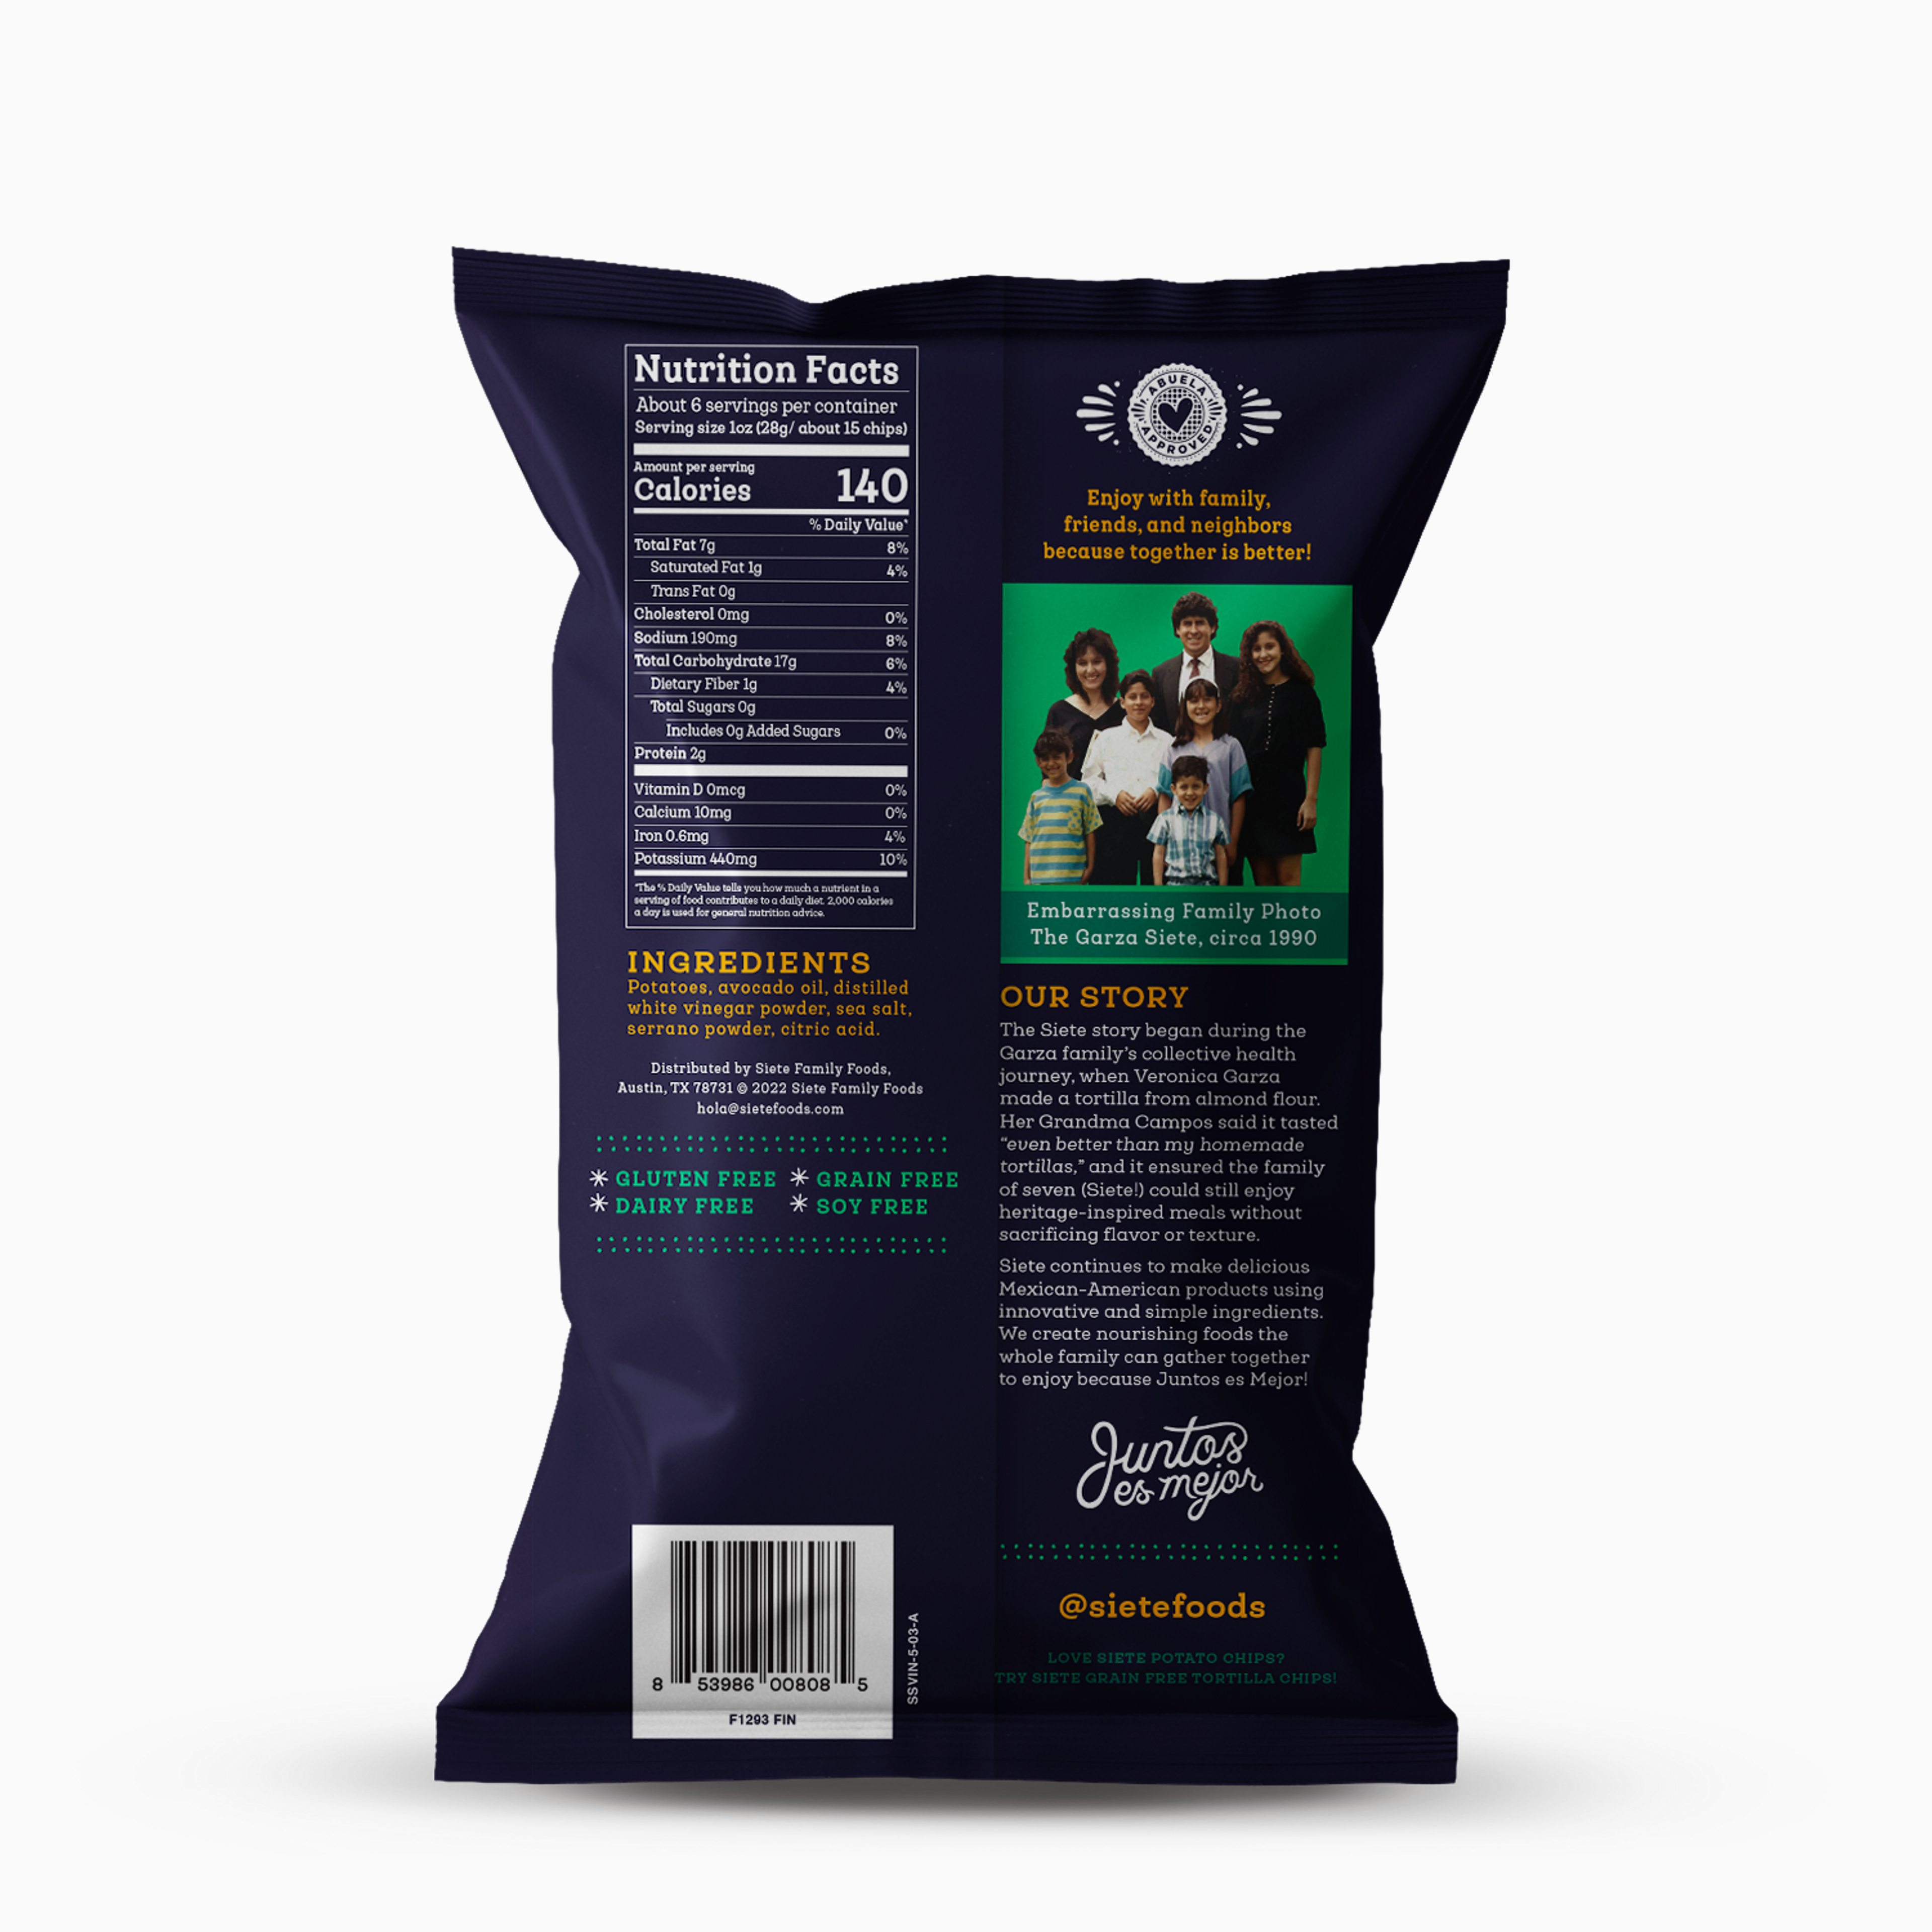 Sea Salt & Vinegar Kettle Cooked Potato Chips with a Hint of Serrano - 6 bags